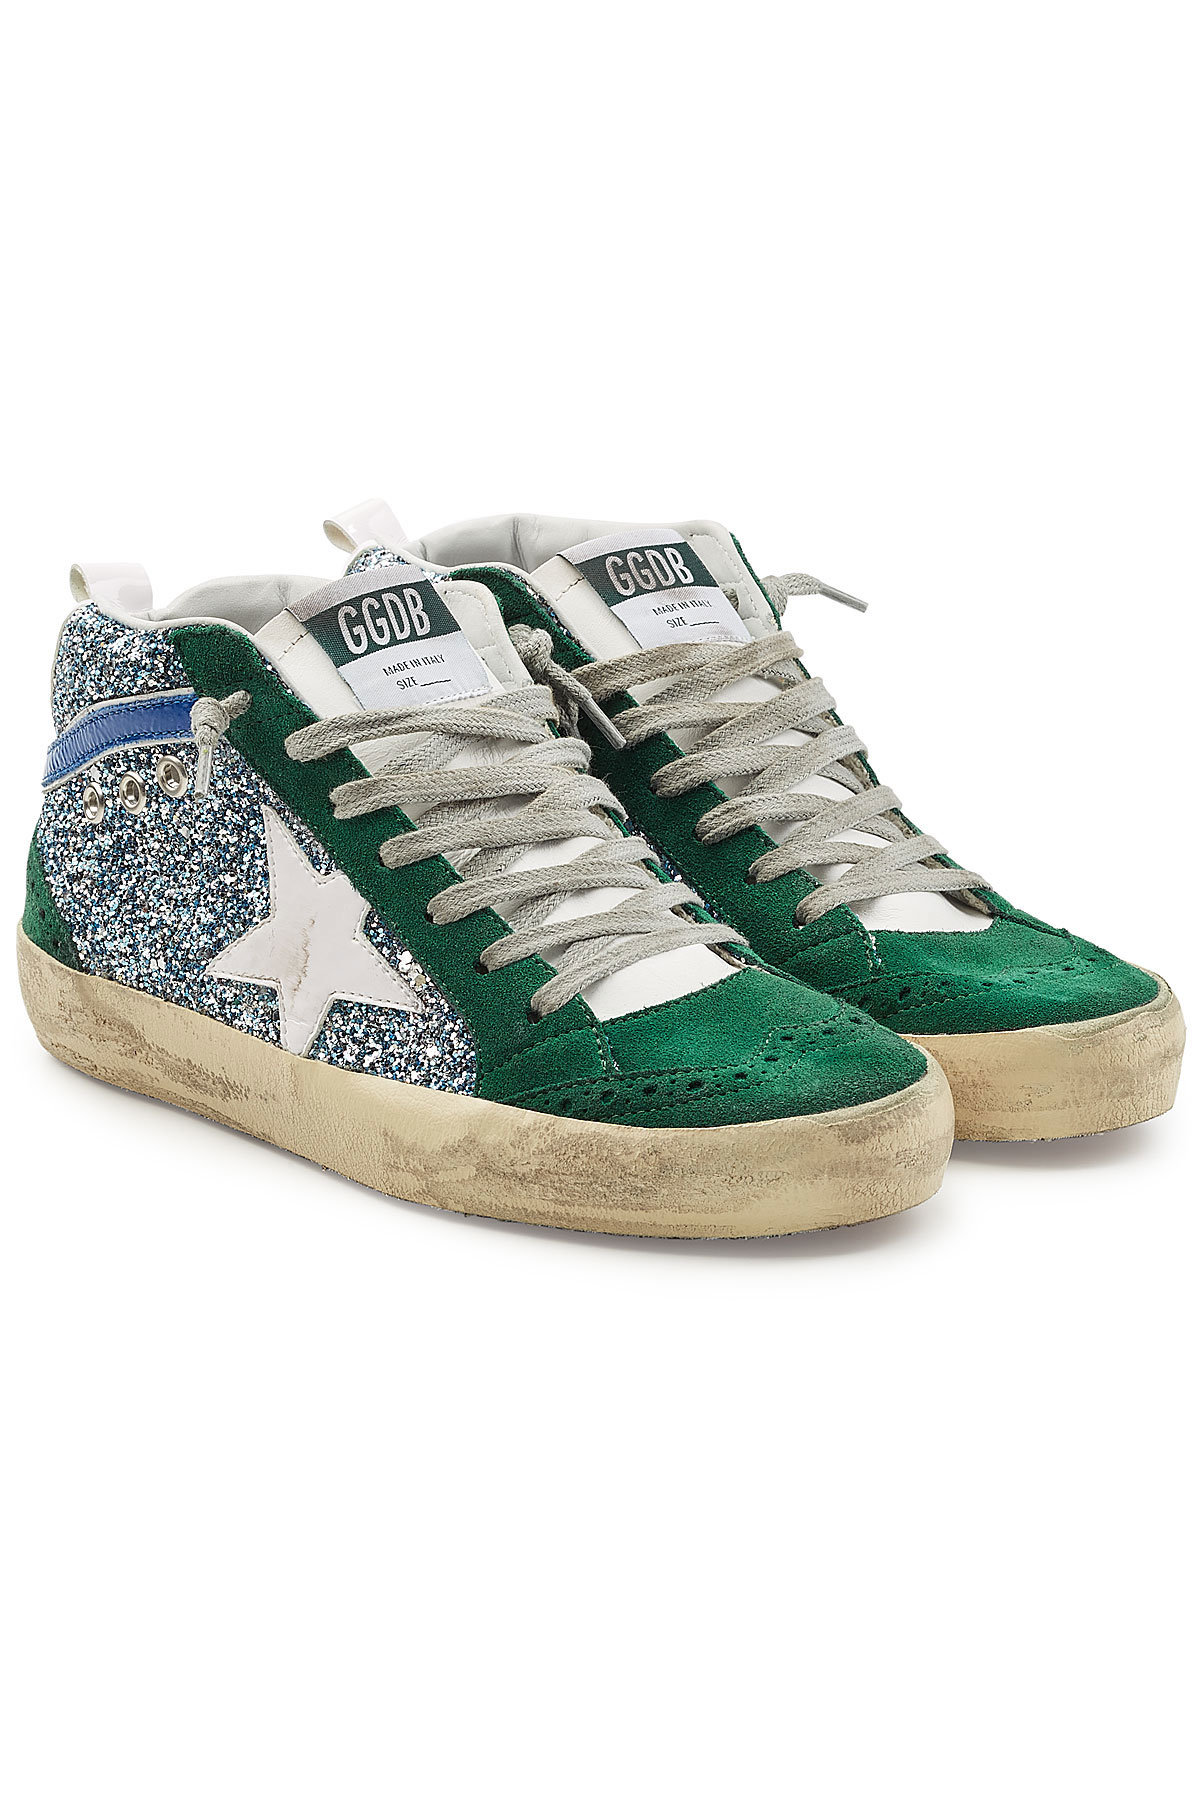 Mid Star Leather, Suede and Glitter Sneakers by Golden Goose Deluxe Brand